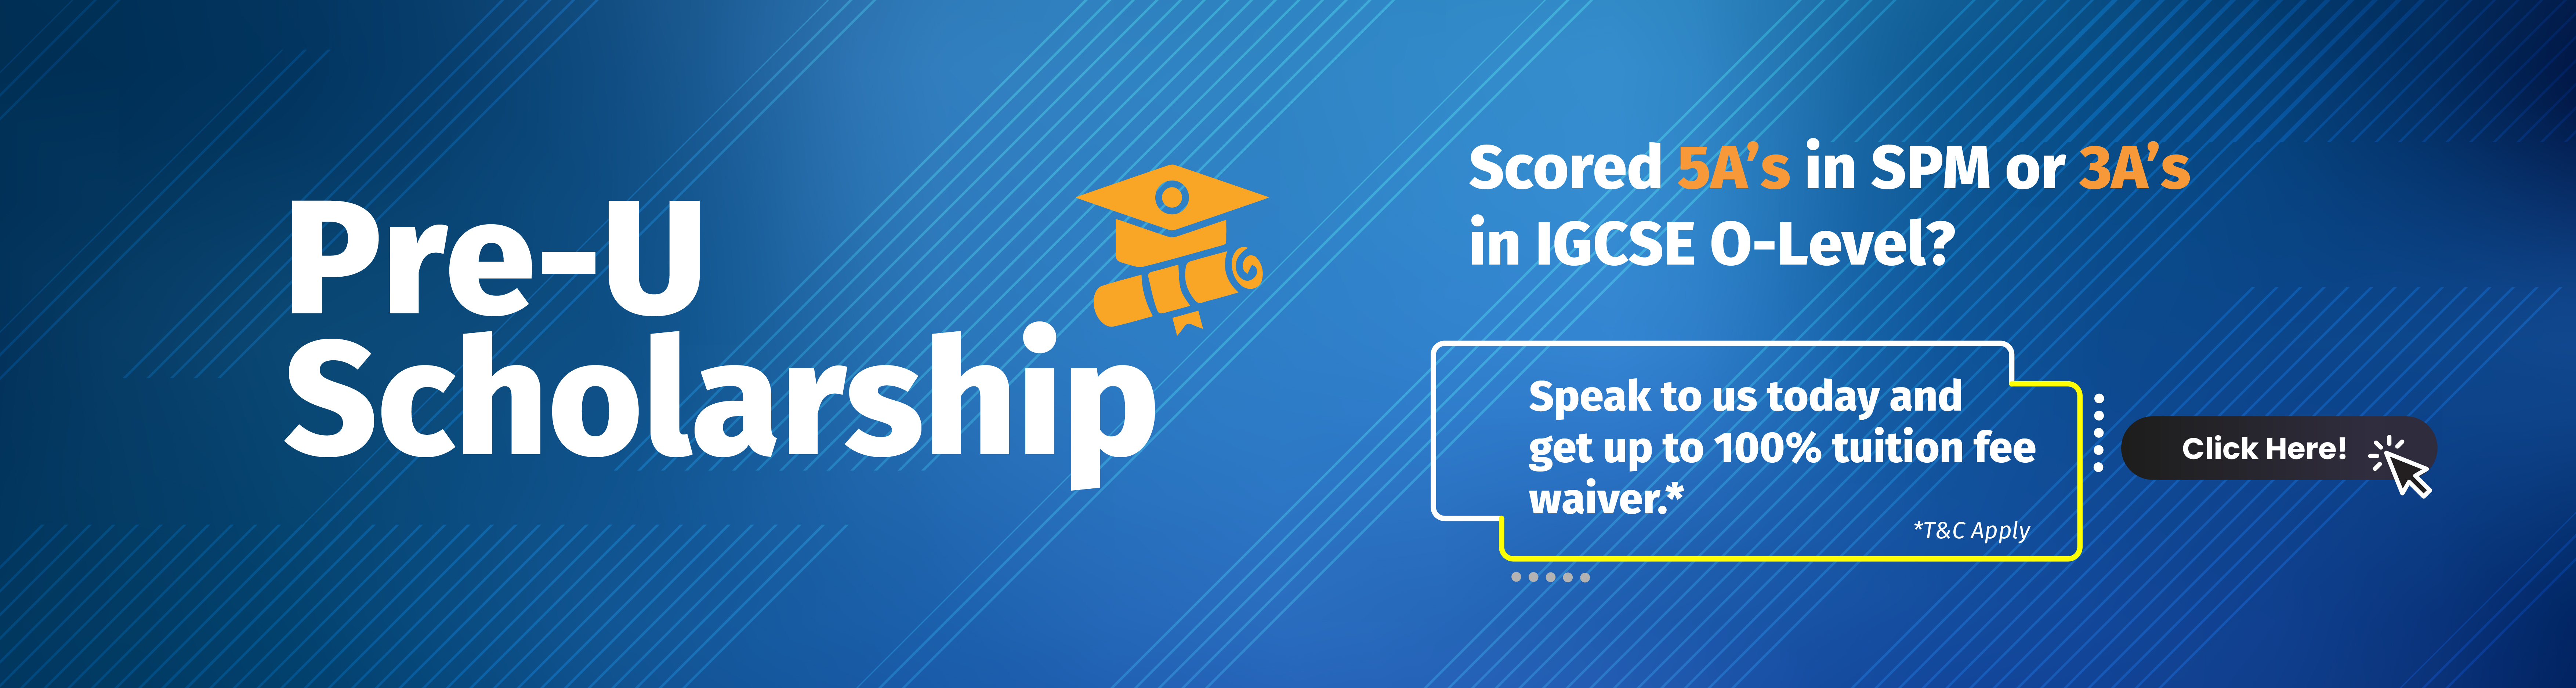 Scored 5Aâ€™s in SPM or 3Aâ€™s in IGCSE O-Level 2020? Claim your entitlement to be awarded with our Trust Pre-U Scholarship